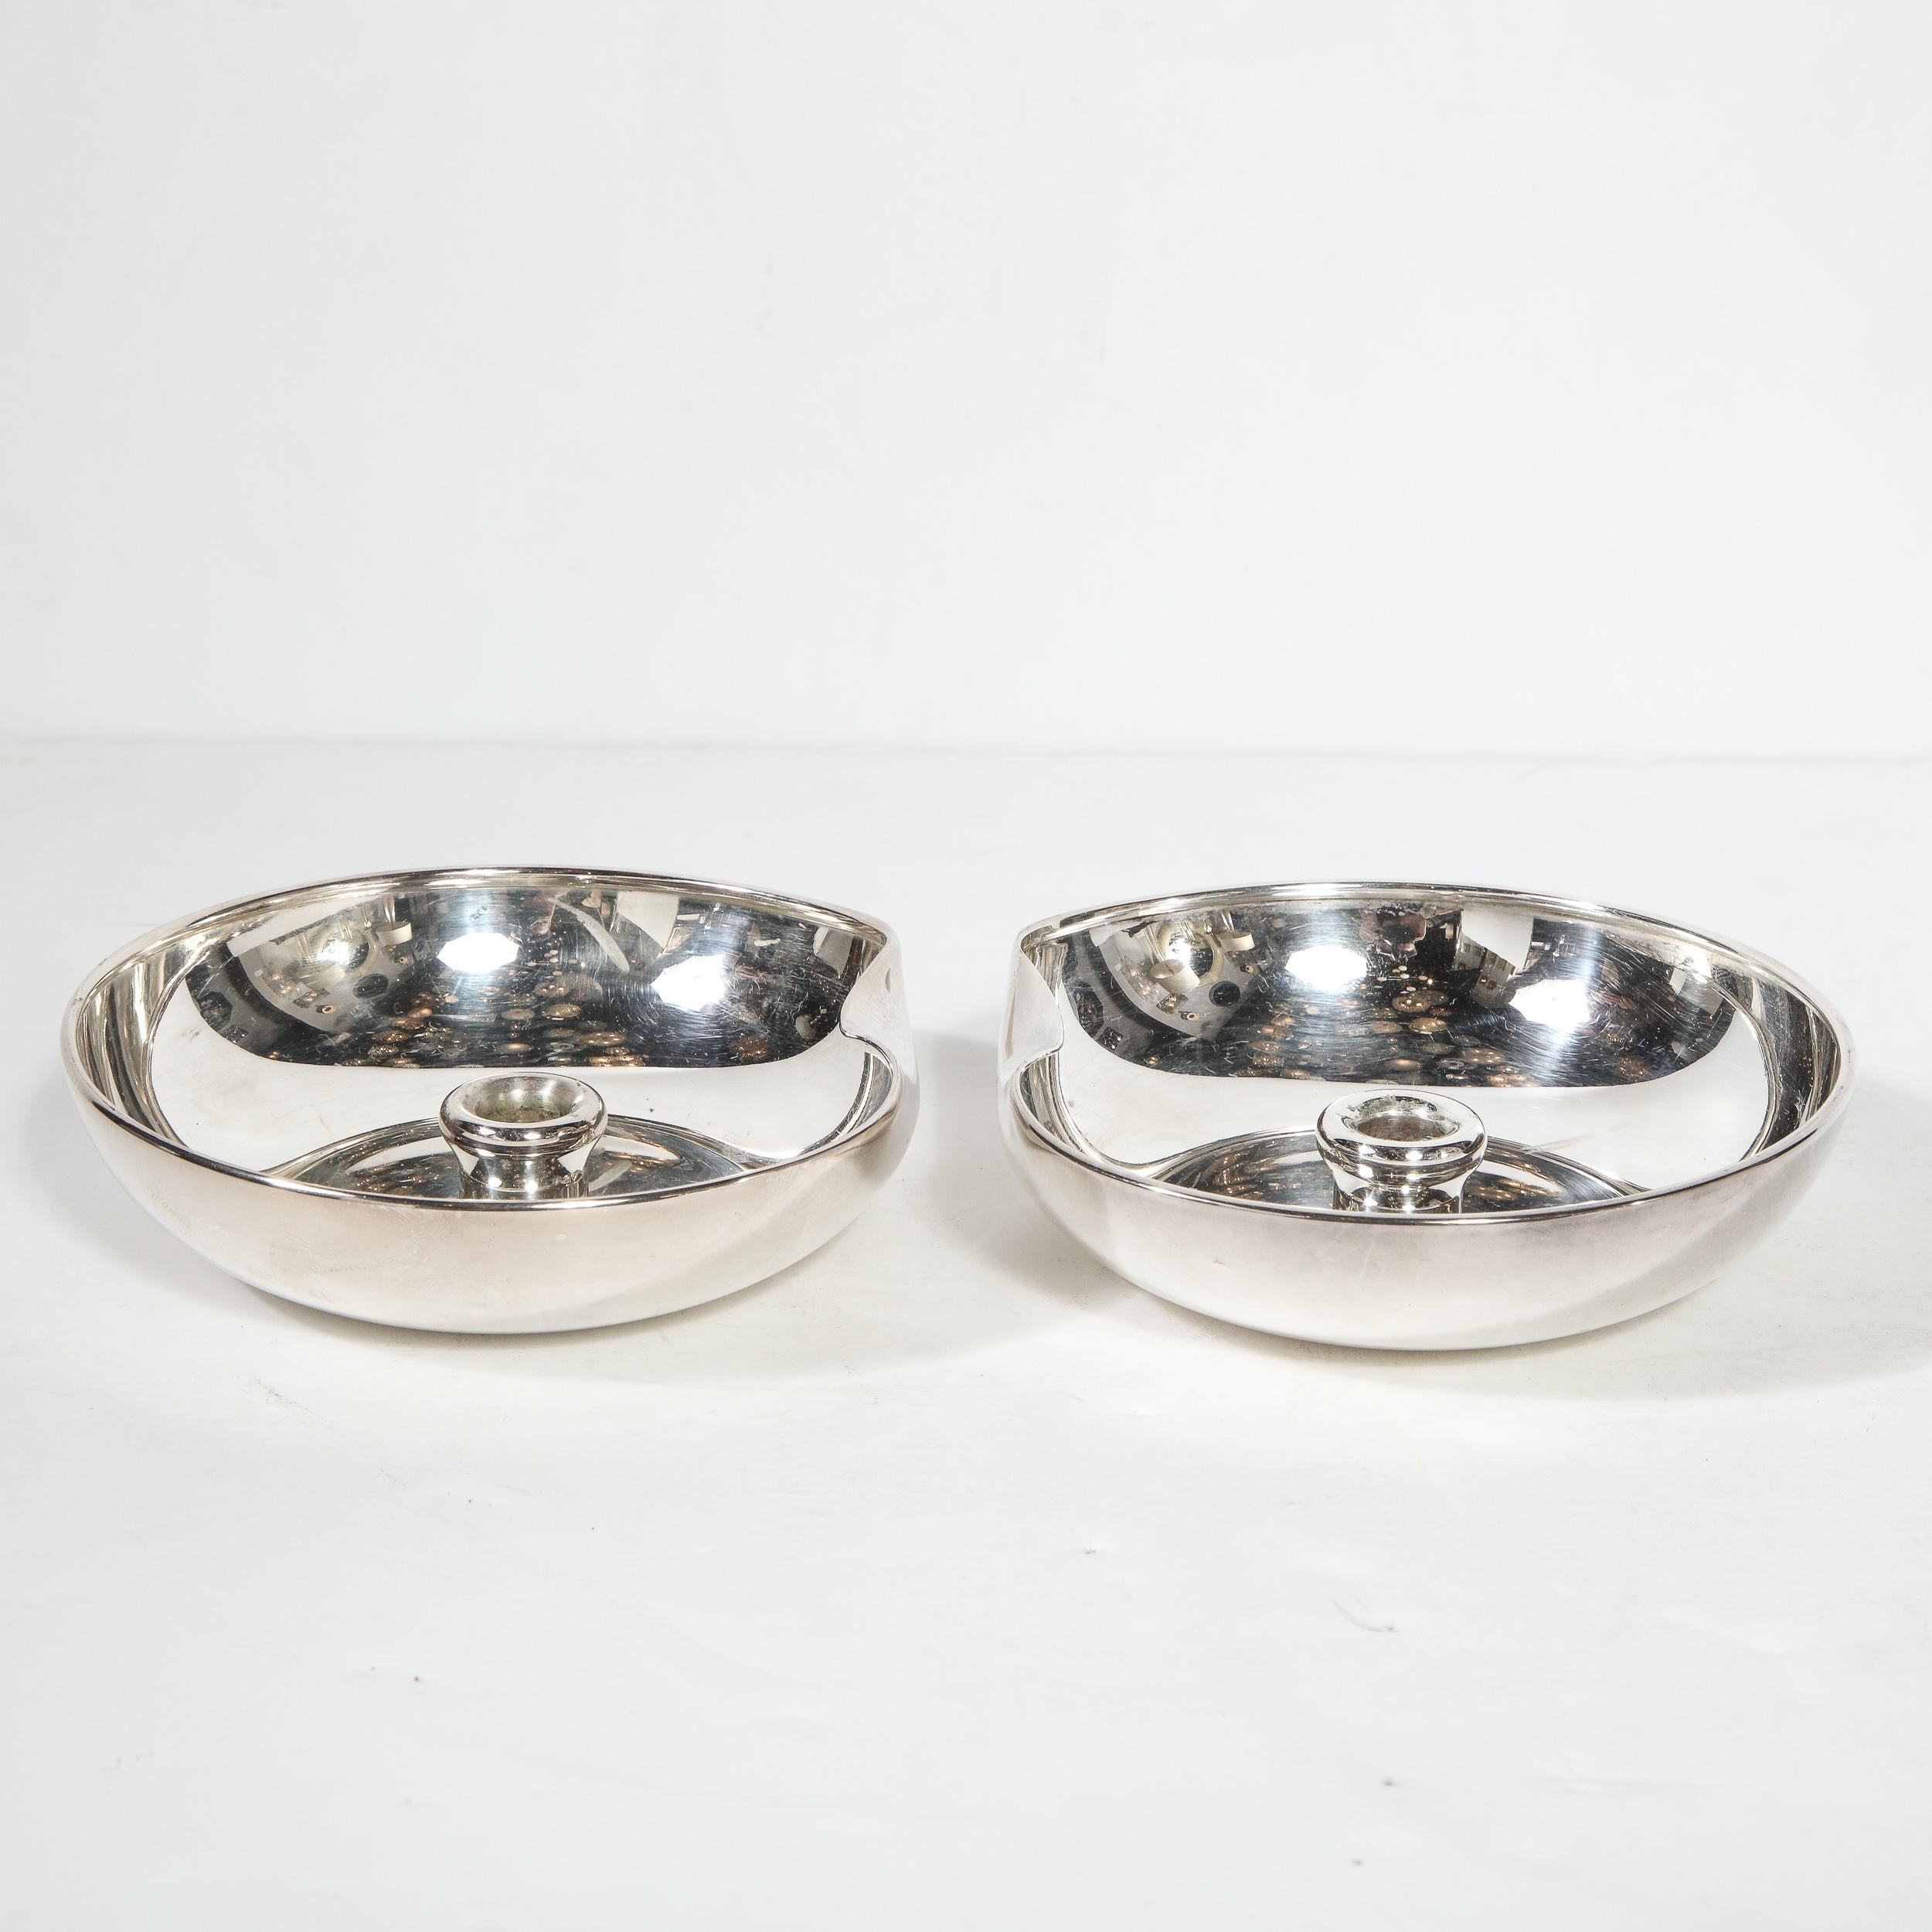 This stunning pair of Modernist sterling silver candle holders were realized by Elsa Peretti for Tiffany & Co, circa 1985. They feature circular bodies with curved raised sides and a sinuously curved depression on end of each candleholder. The